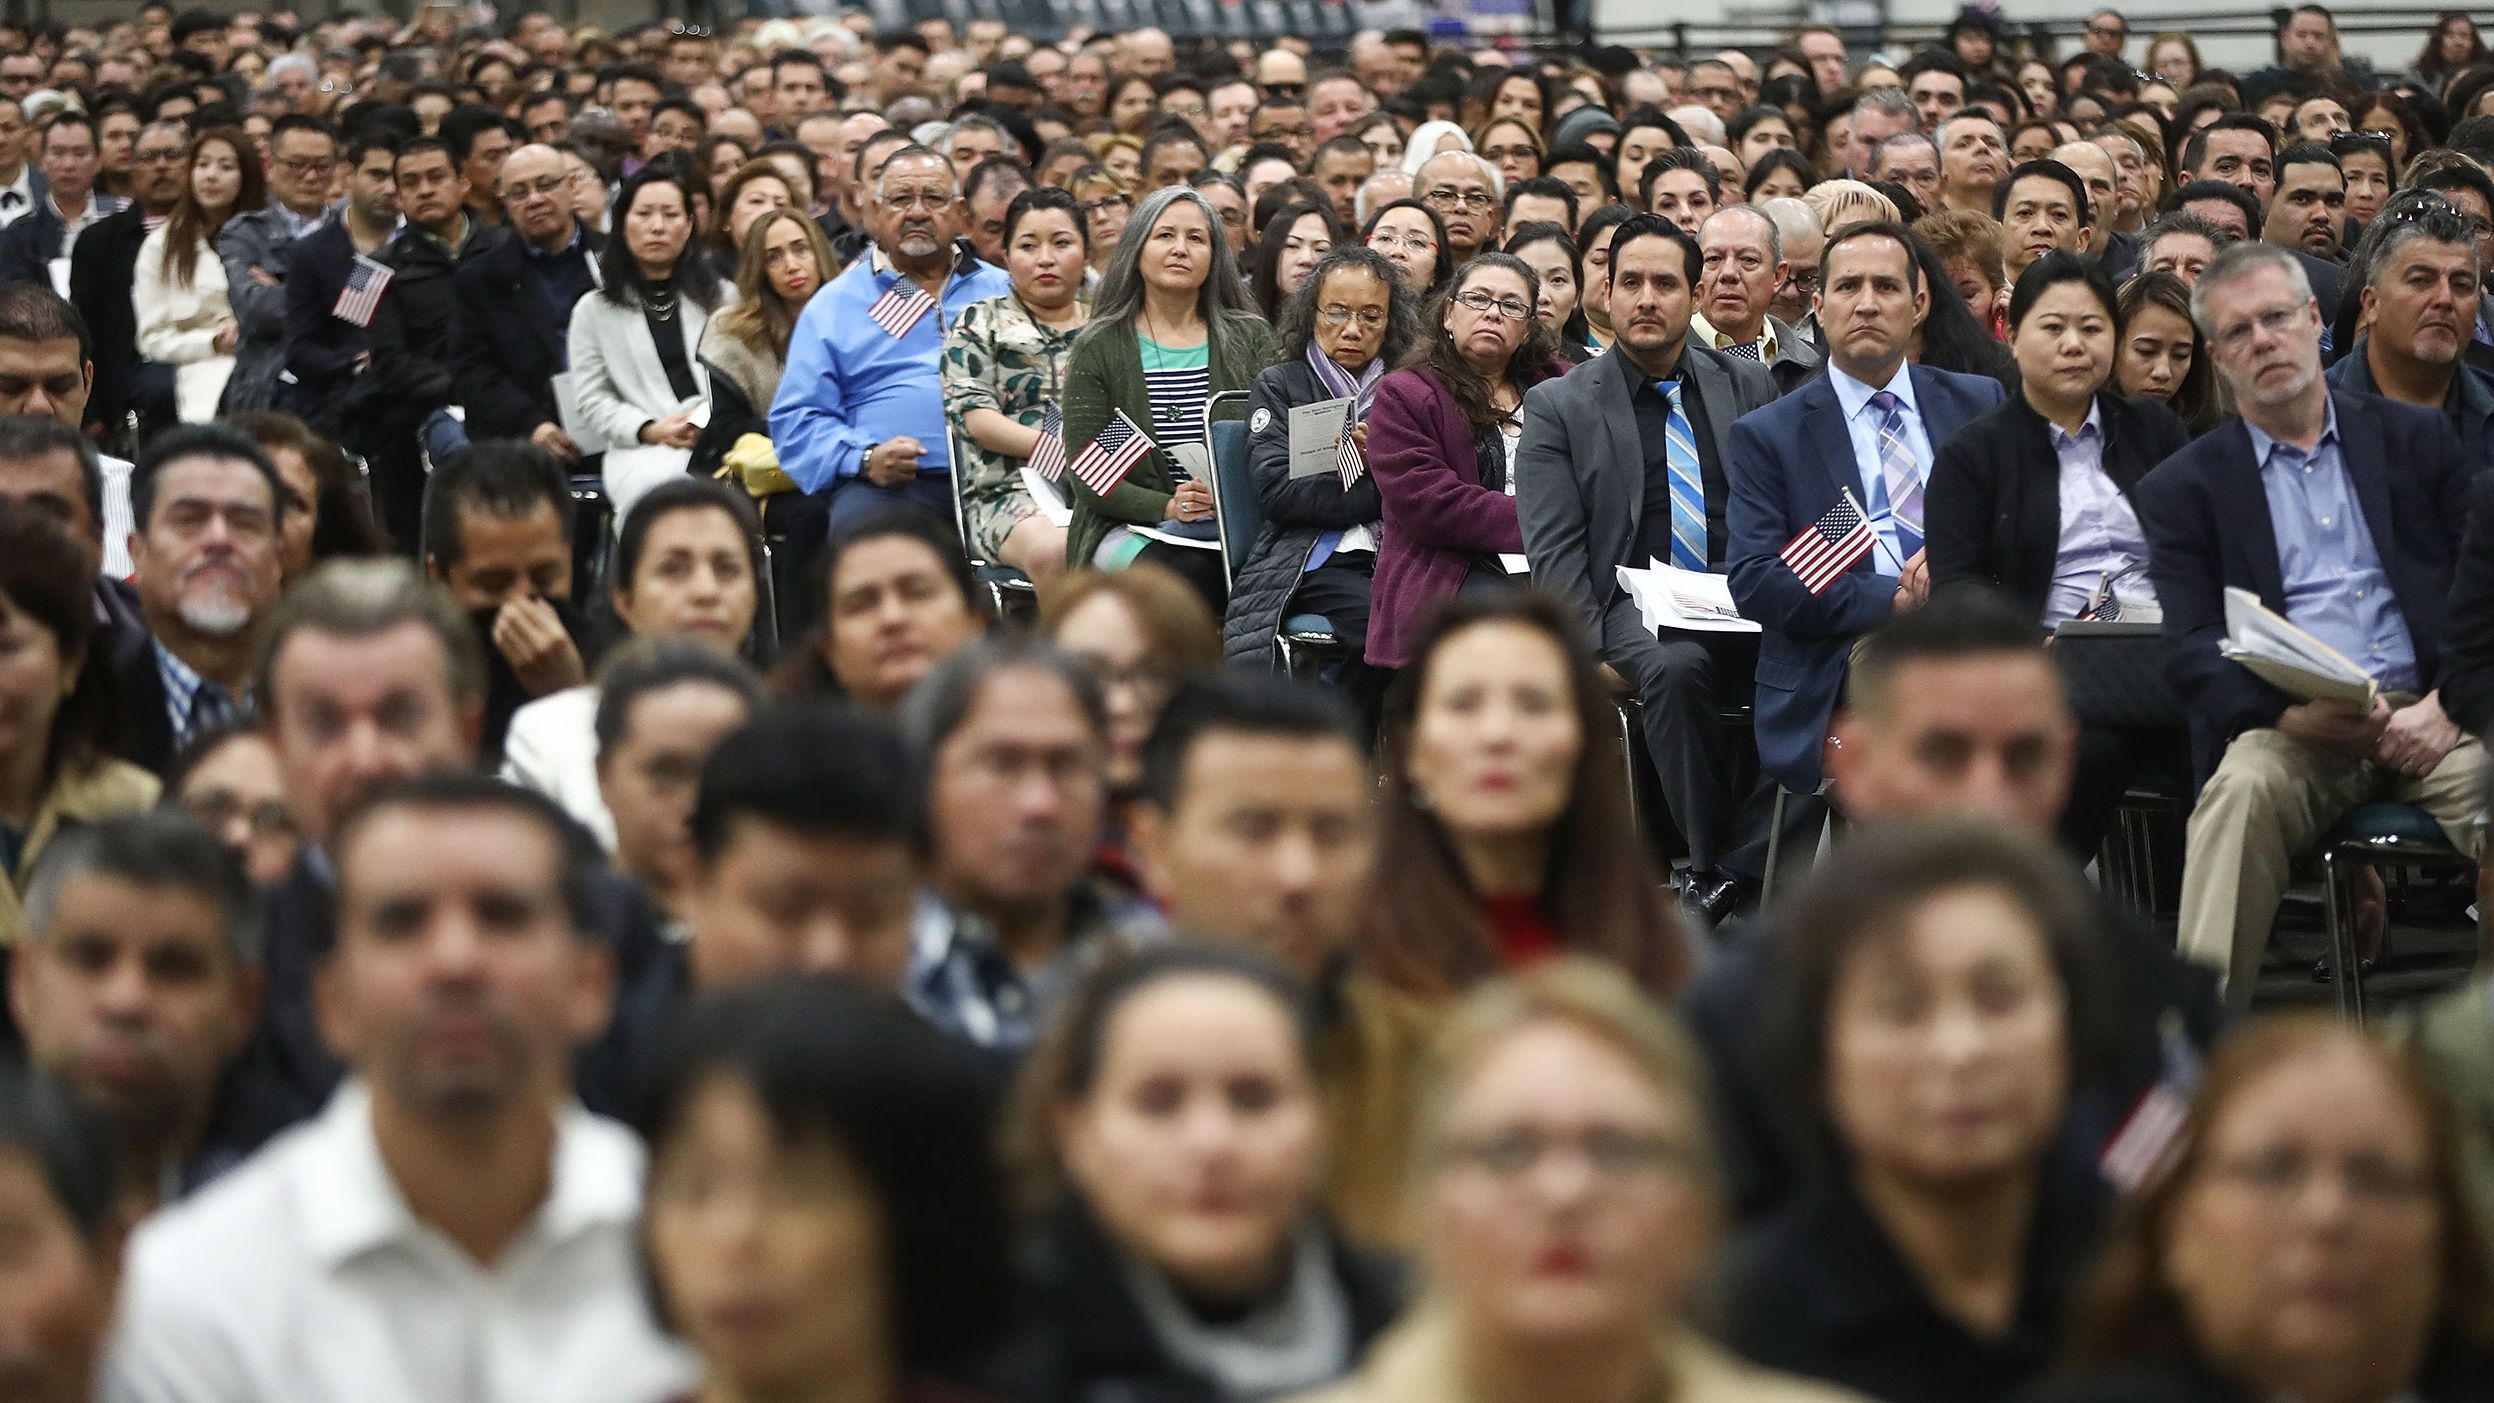 New US citizens gather at a naturalization ceremony on March 20, 2018, in Los Angeles. The  ceremony welcomed more than 7,200 immigrants from over 100 countries who took the citizenship oath and pledged allegiance to the American flag.